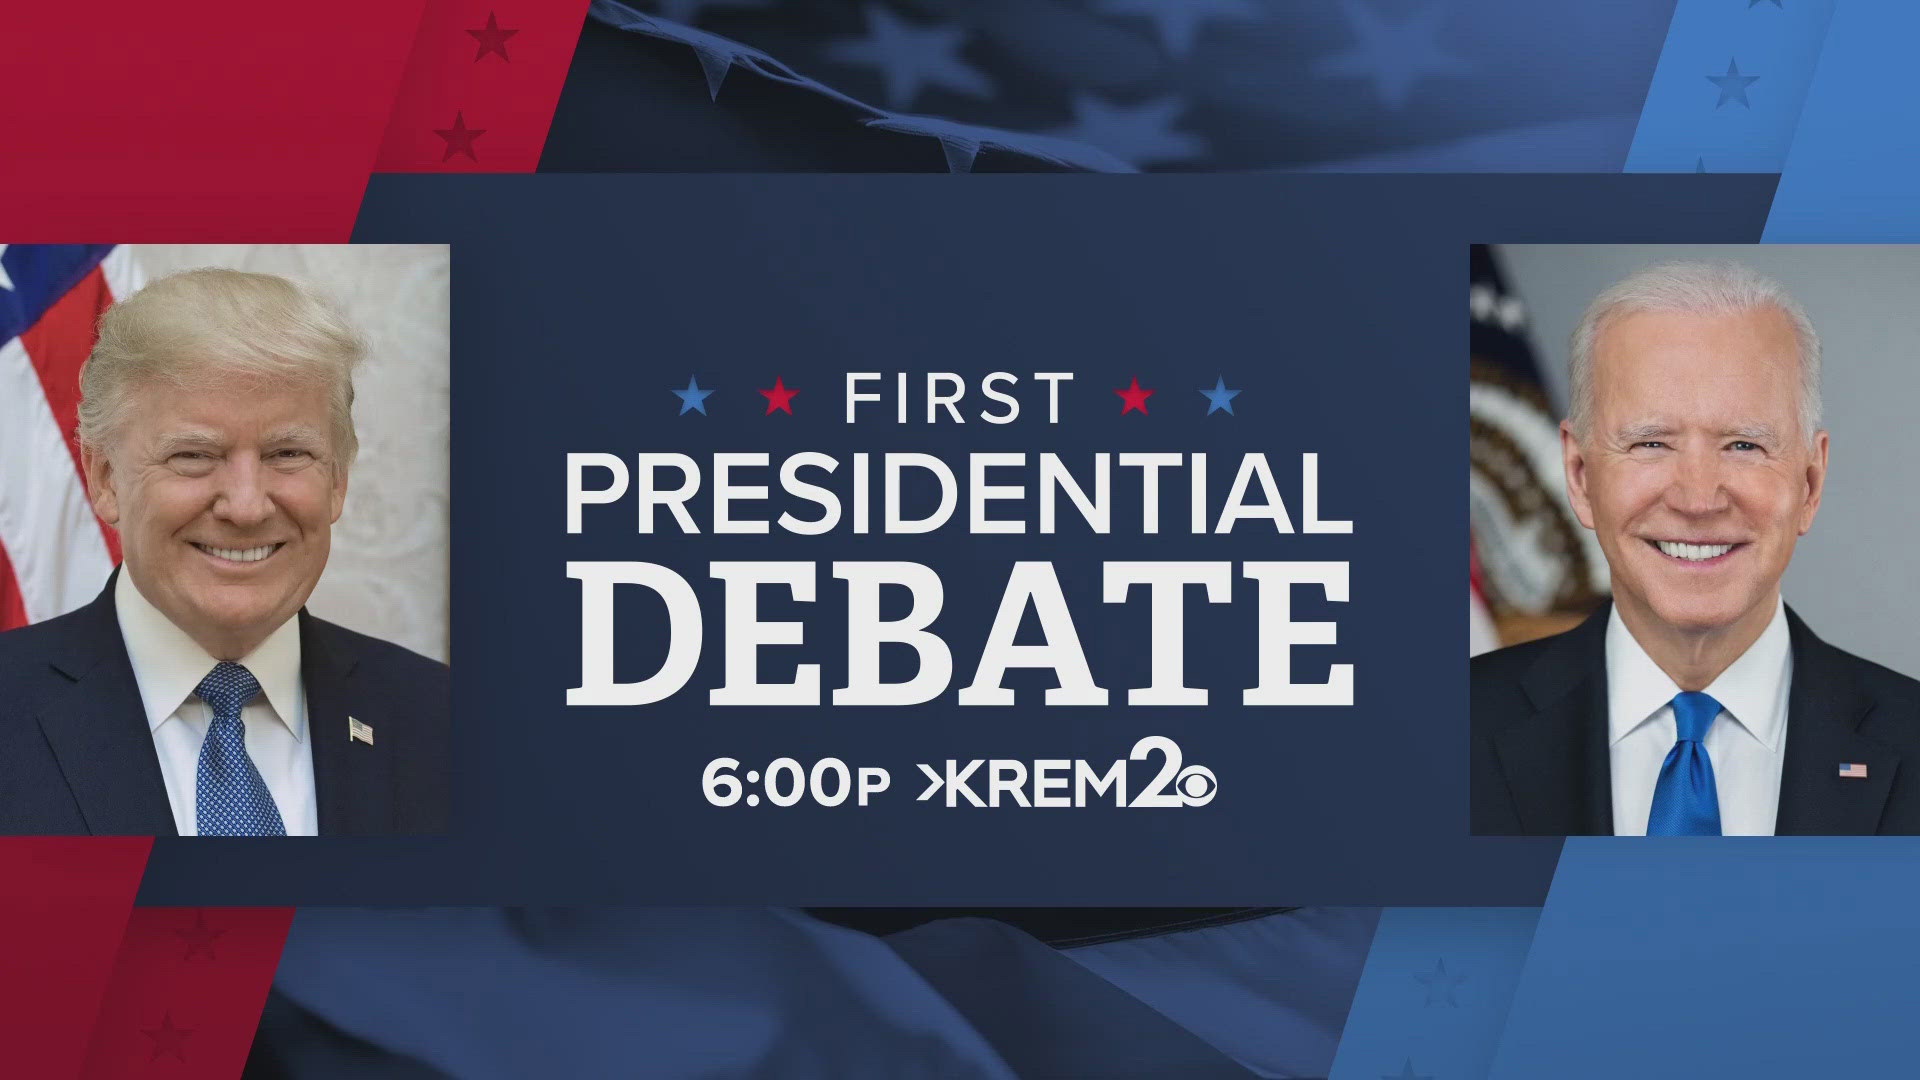 An update of what you can expect to see in the Presidential debate between President Biden and former President Trump.